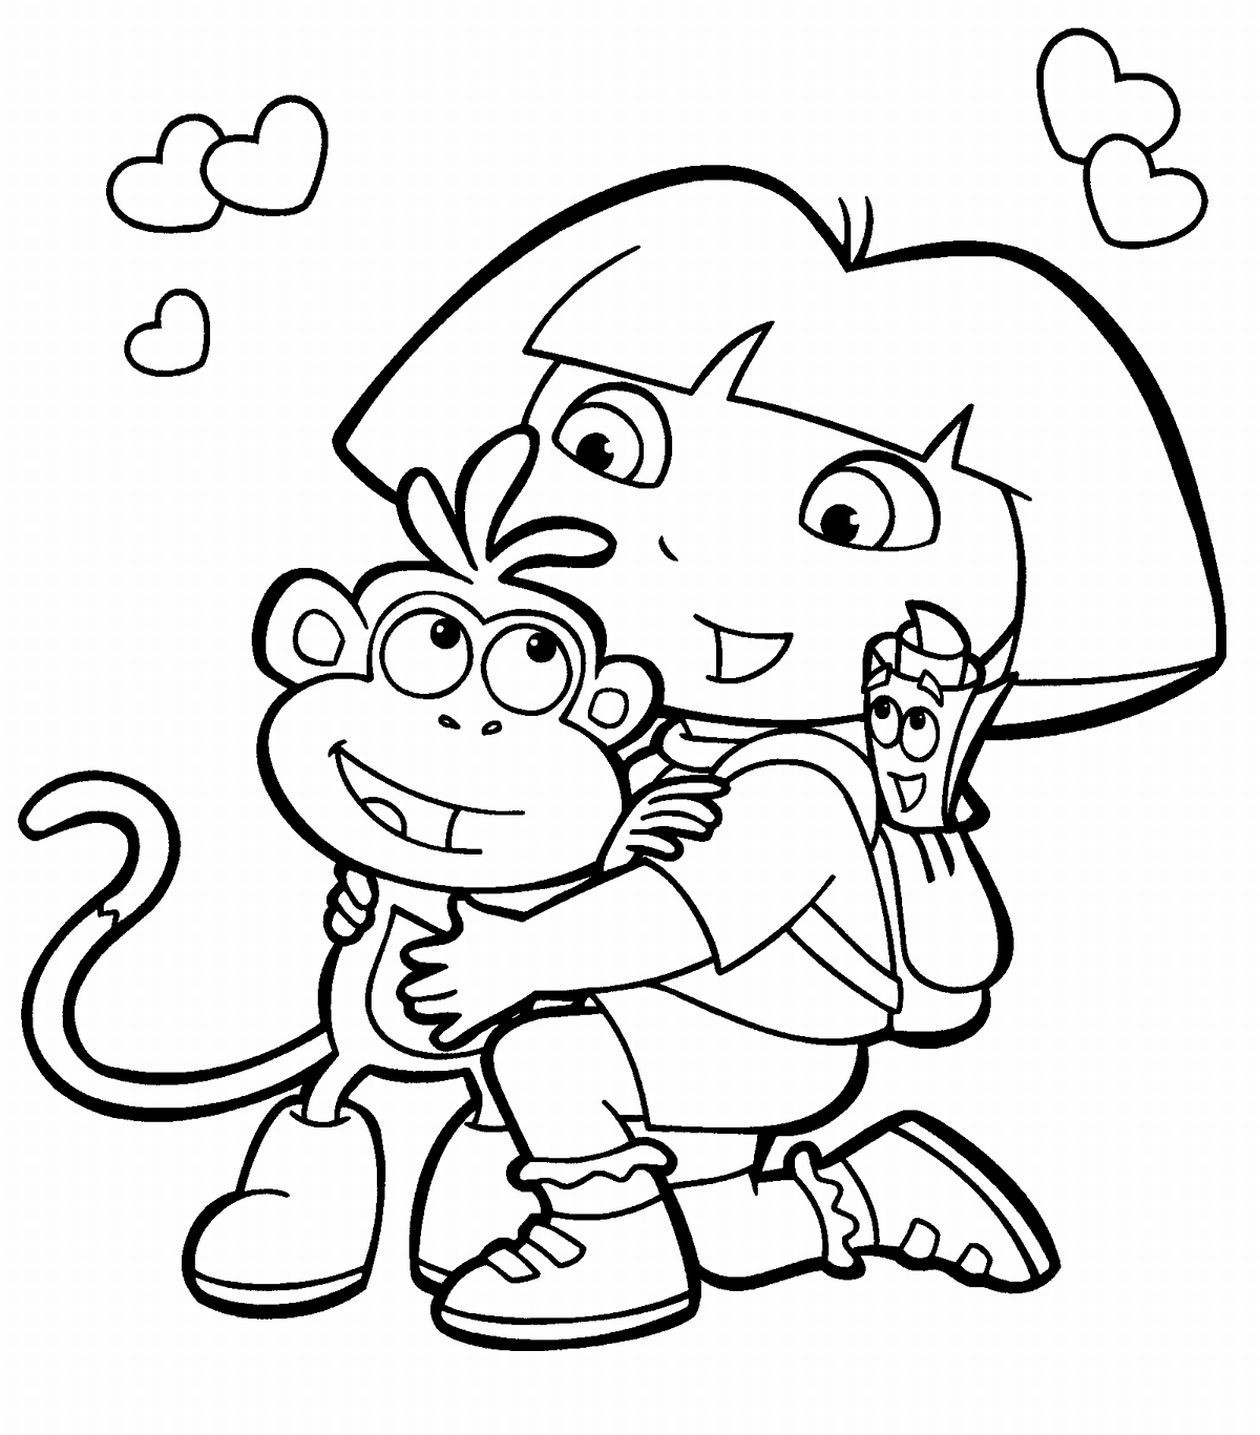 Free Coloring Sheets For Kids
 free printable coloring pages for kids